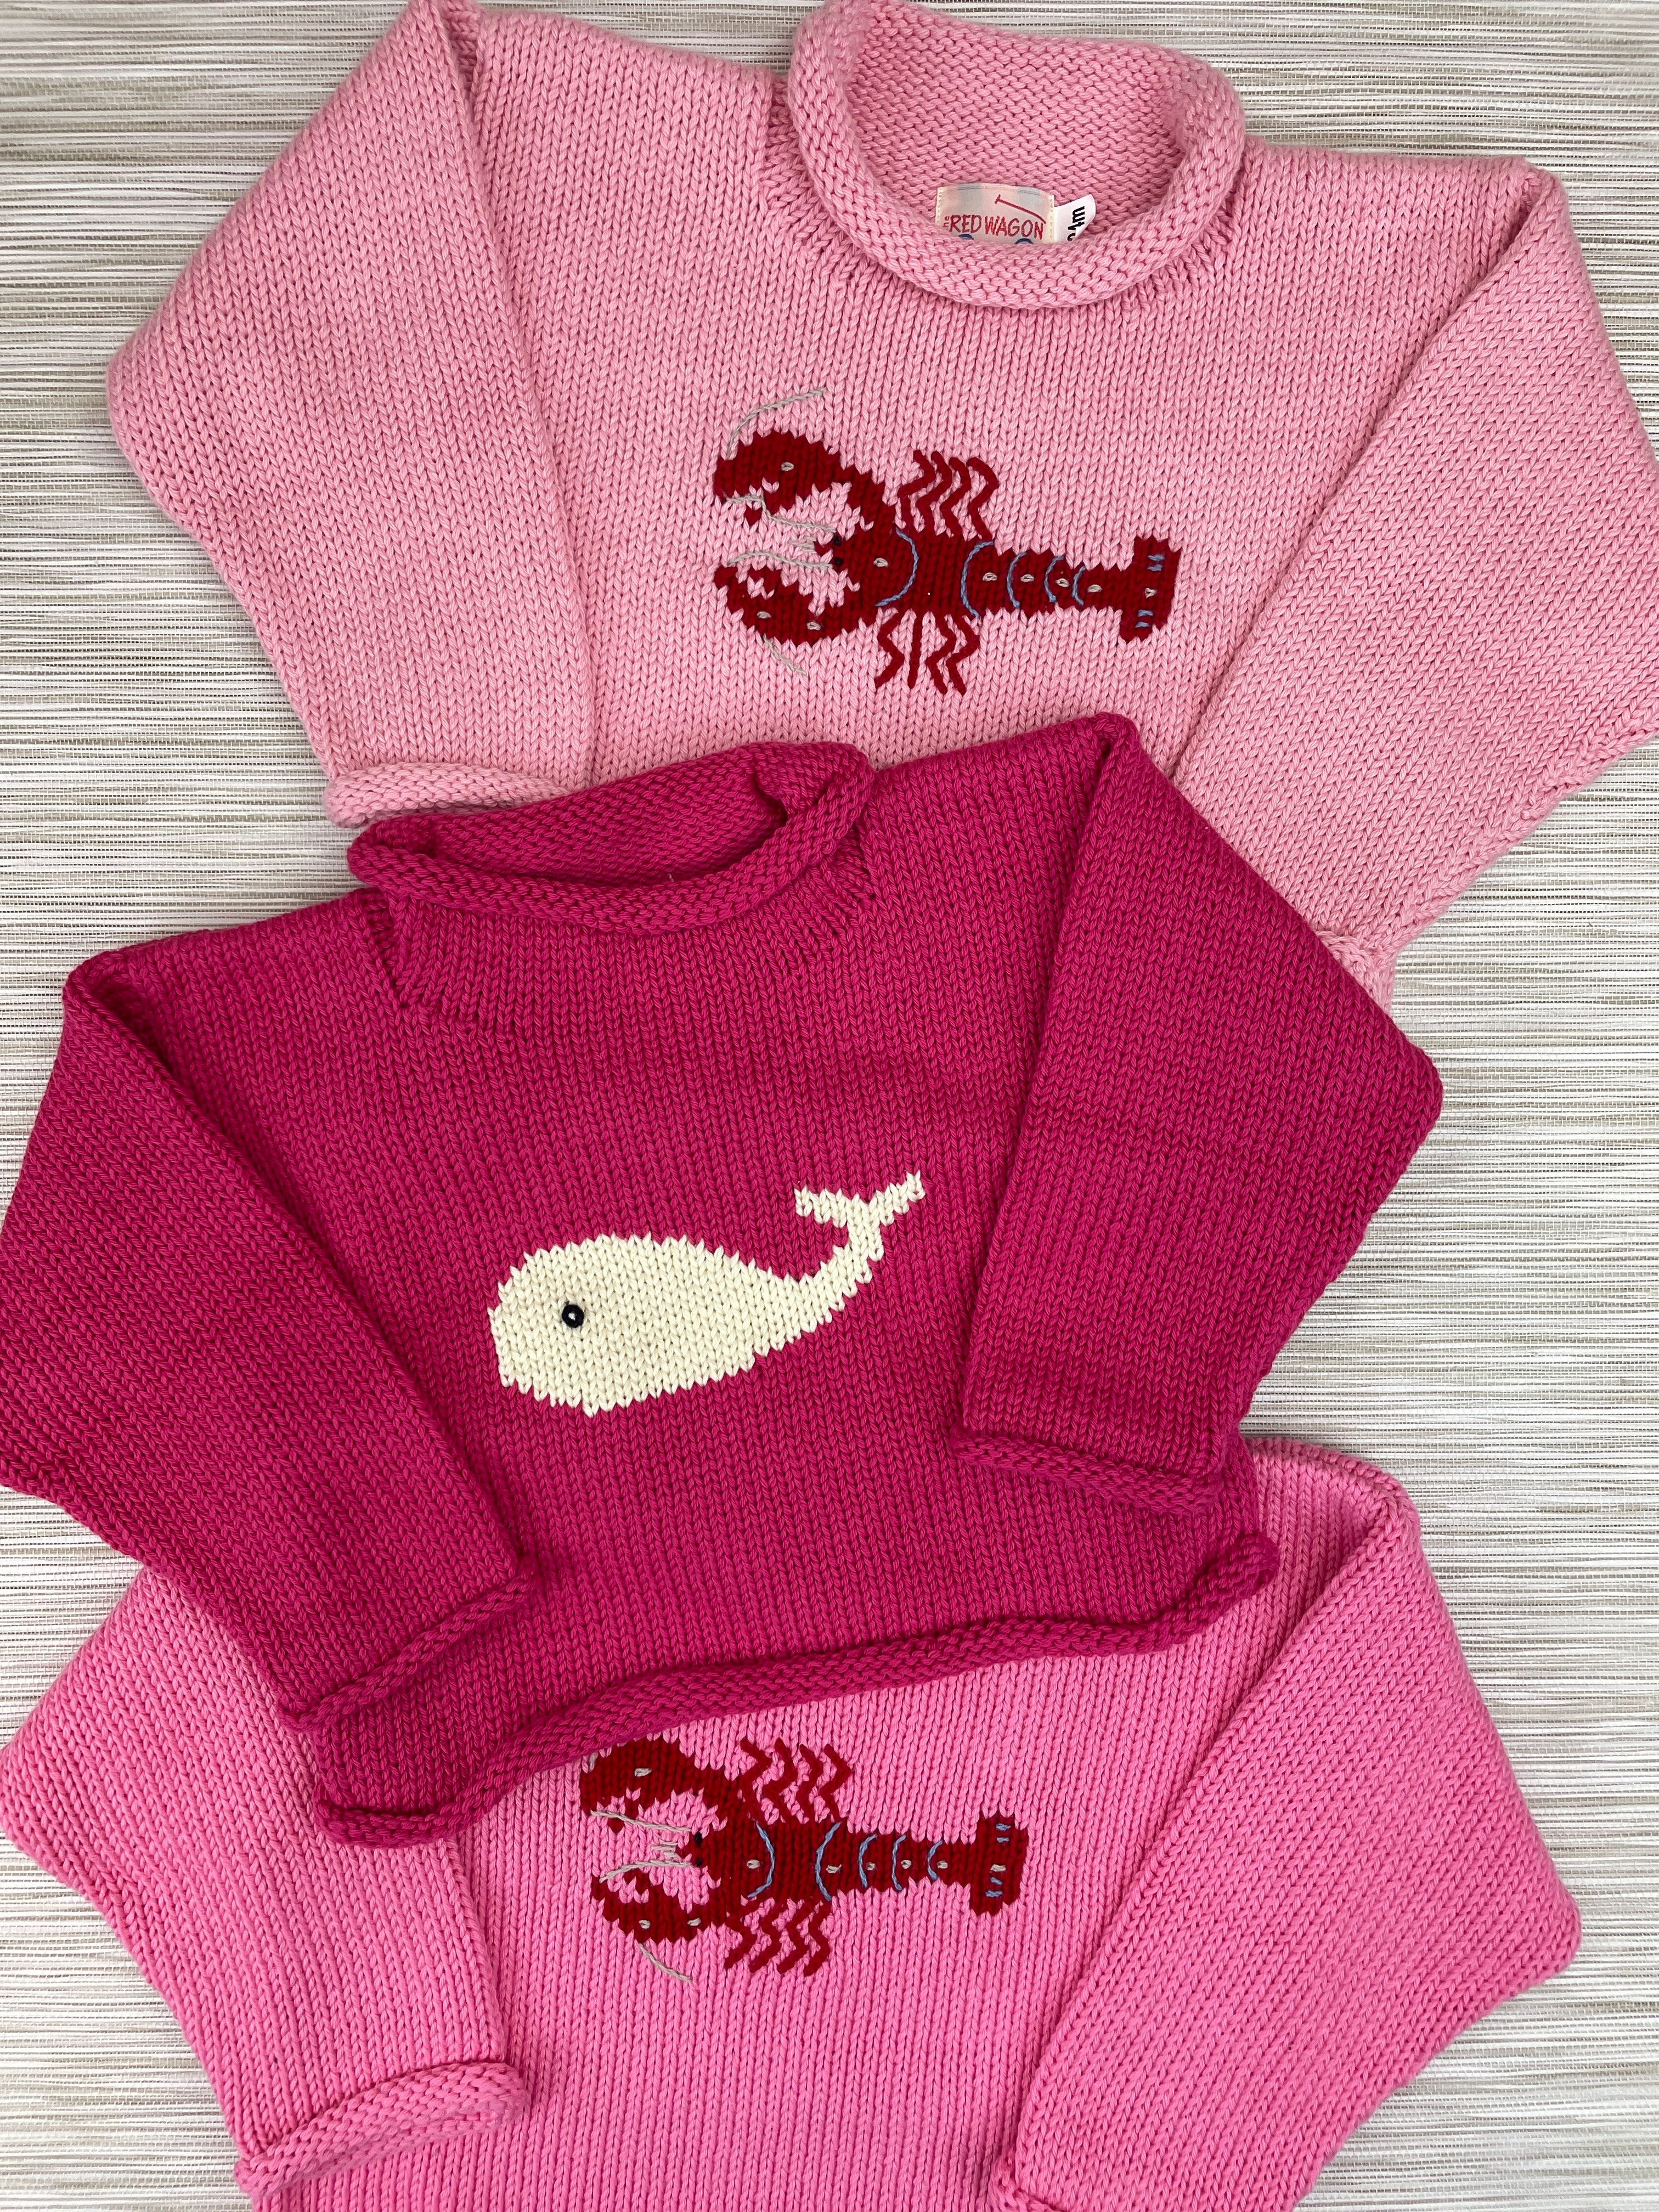 pink whale sweater with pink lobster sweaters